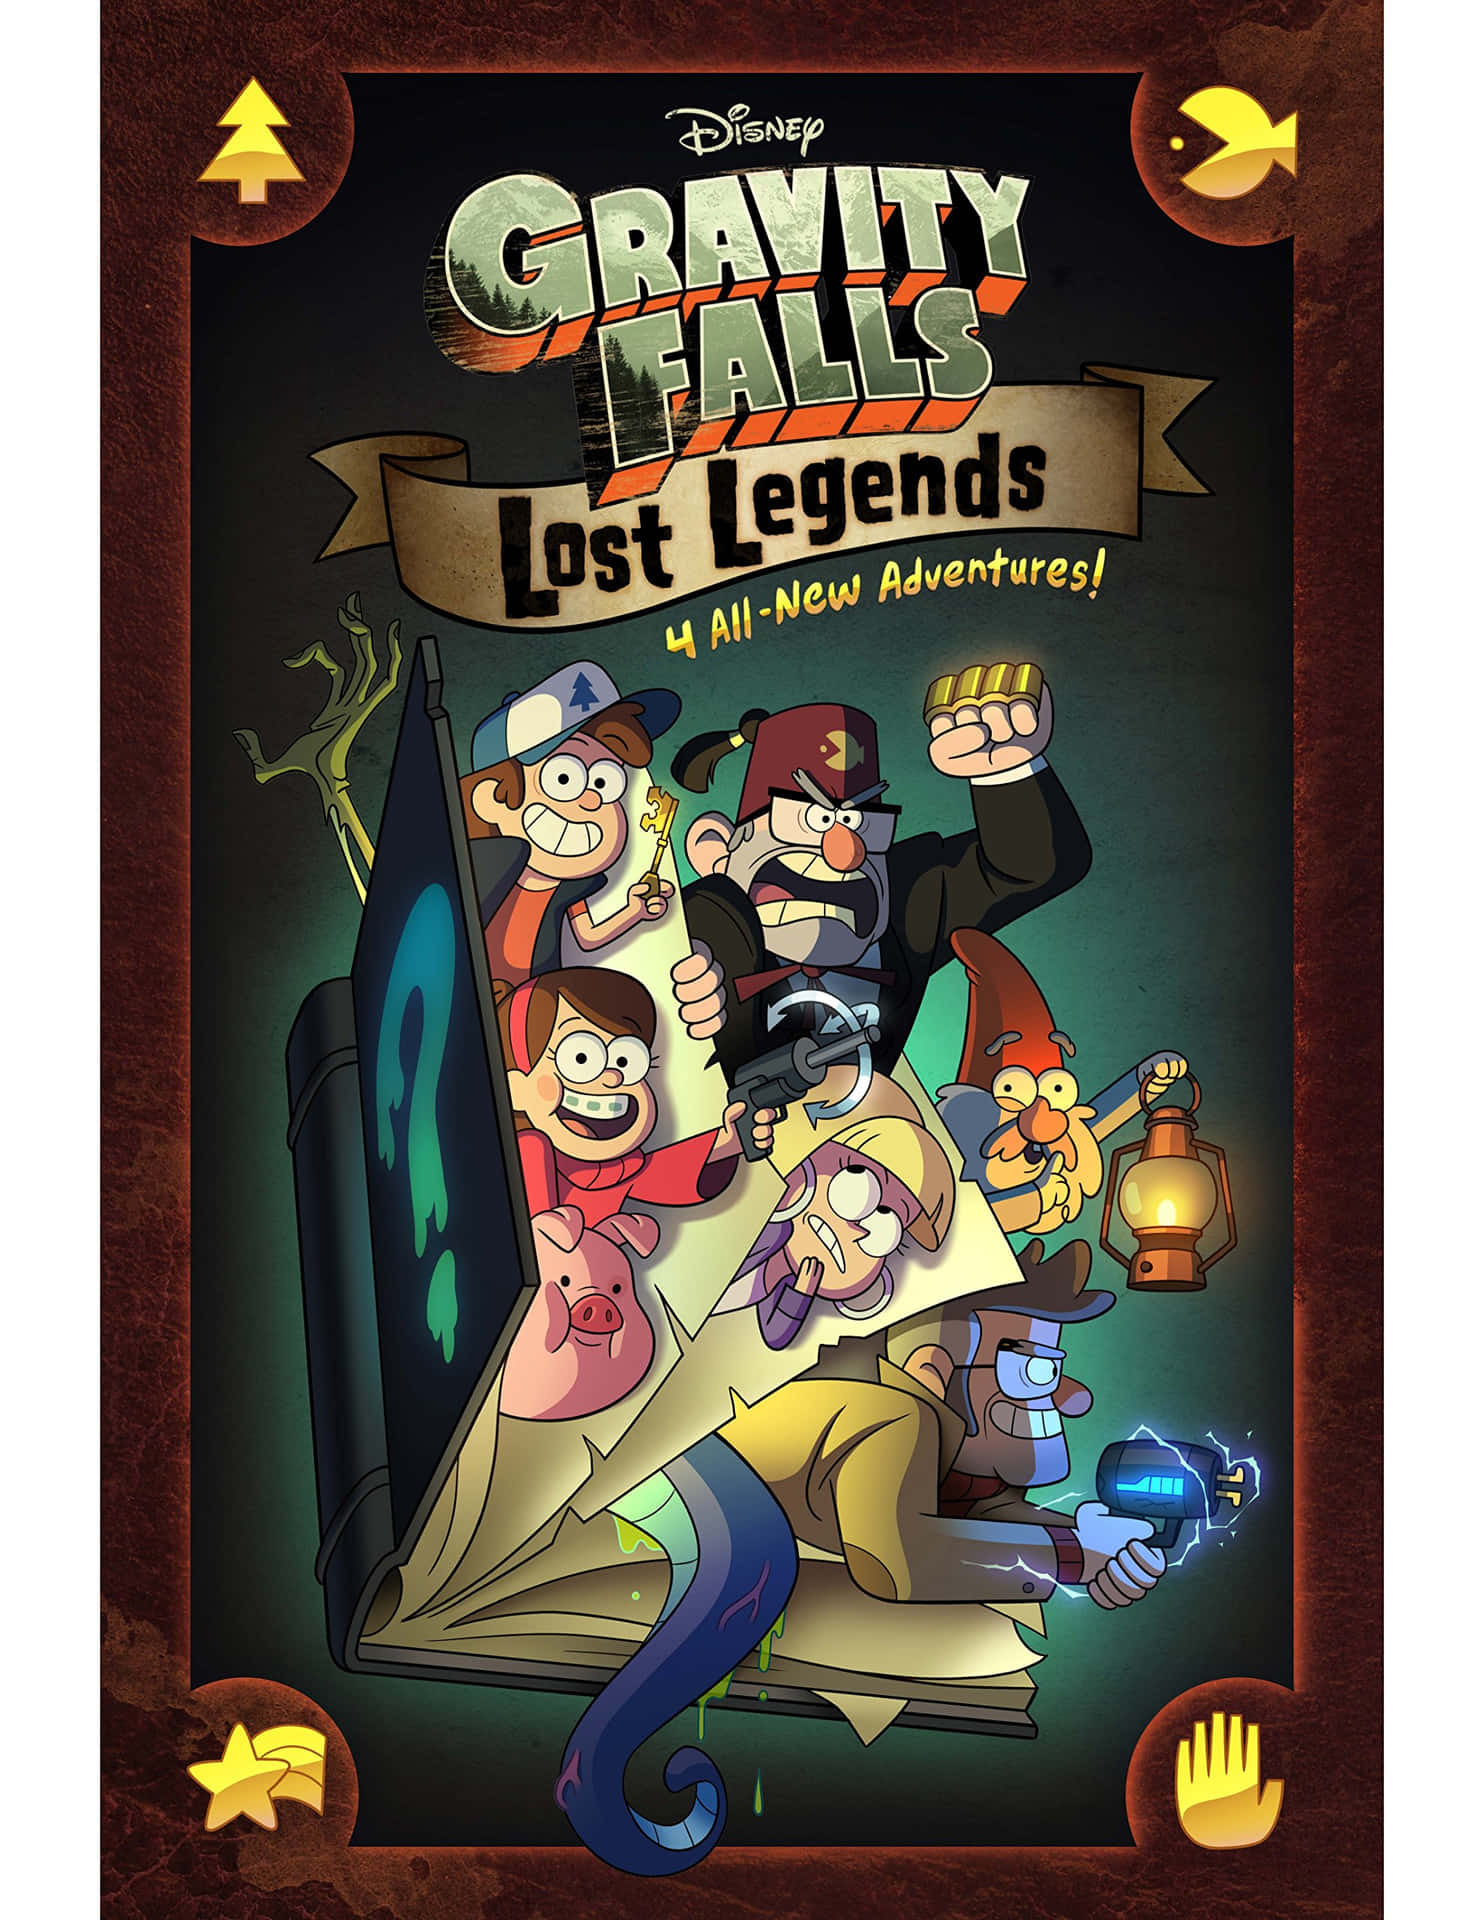 Uncover the mysteries of Gravity Falls